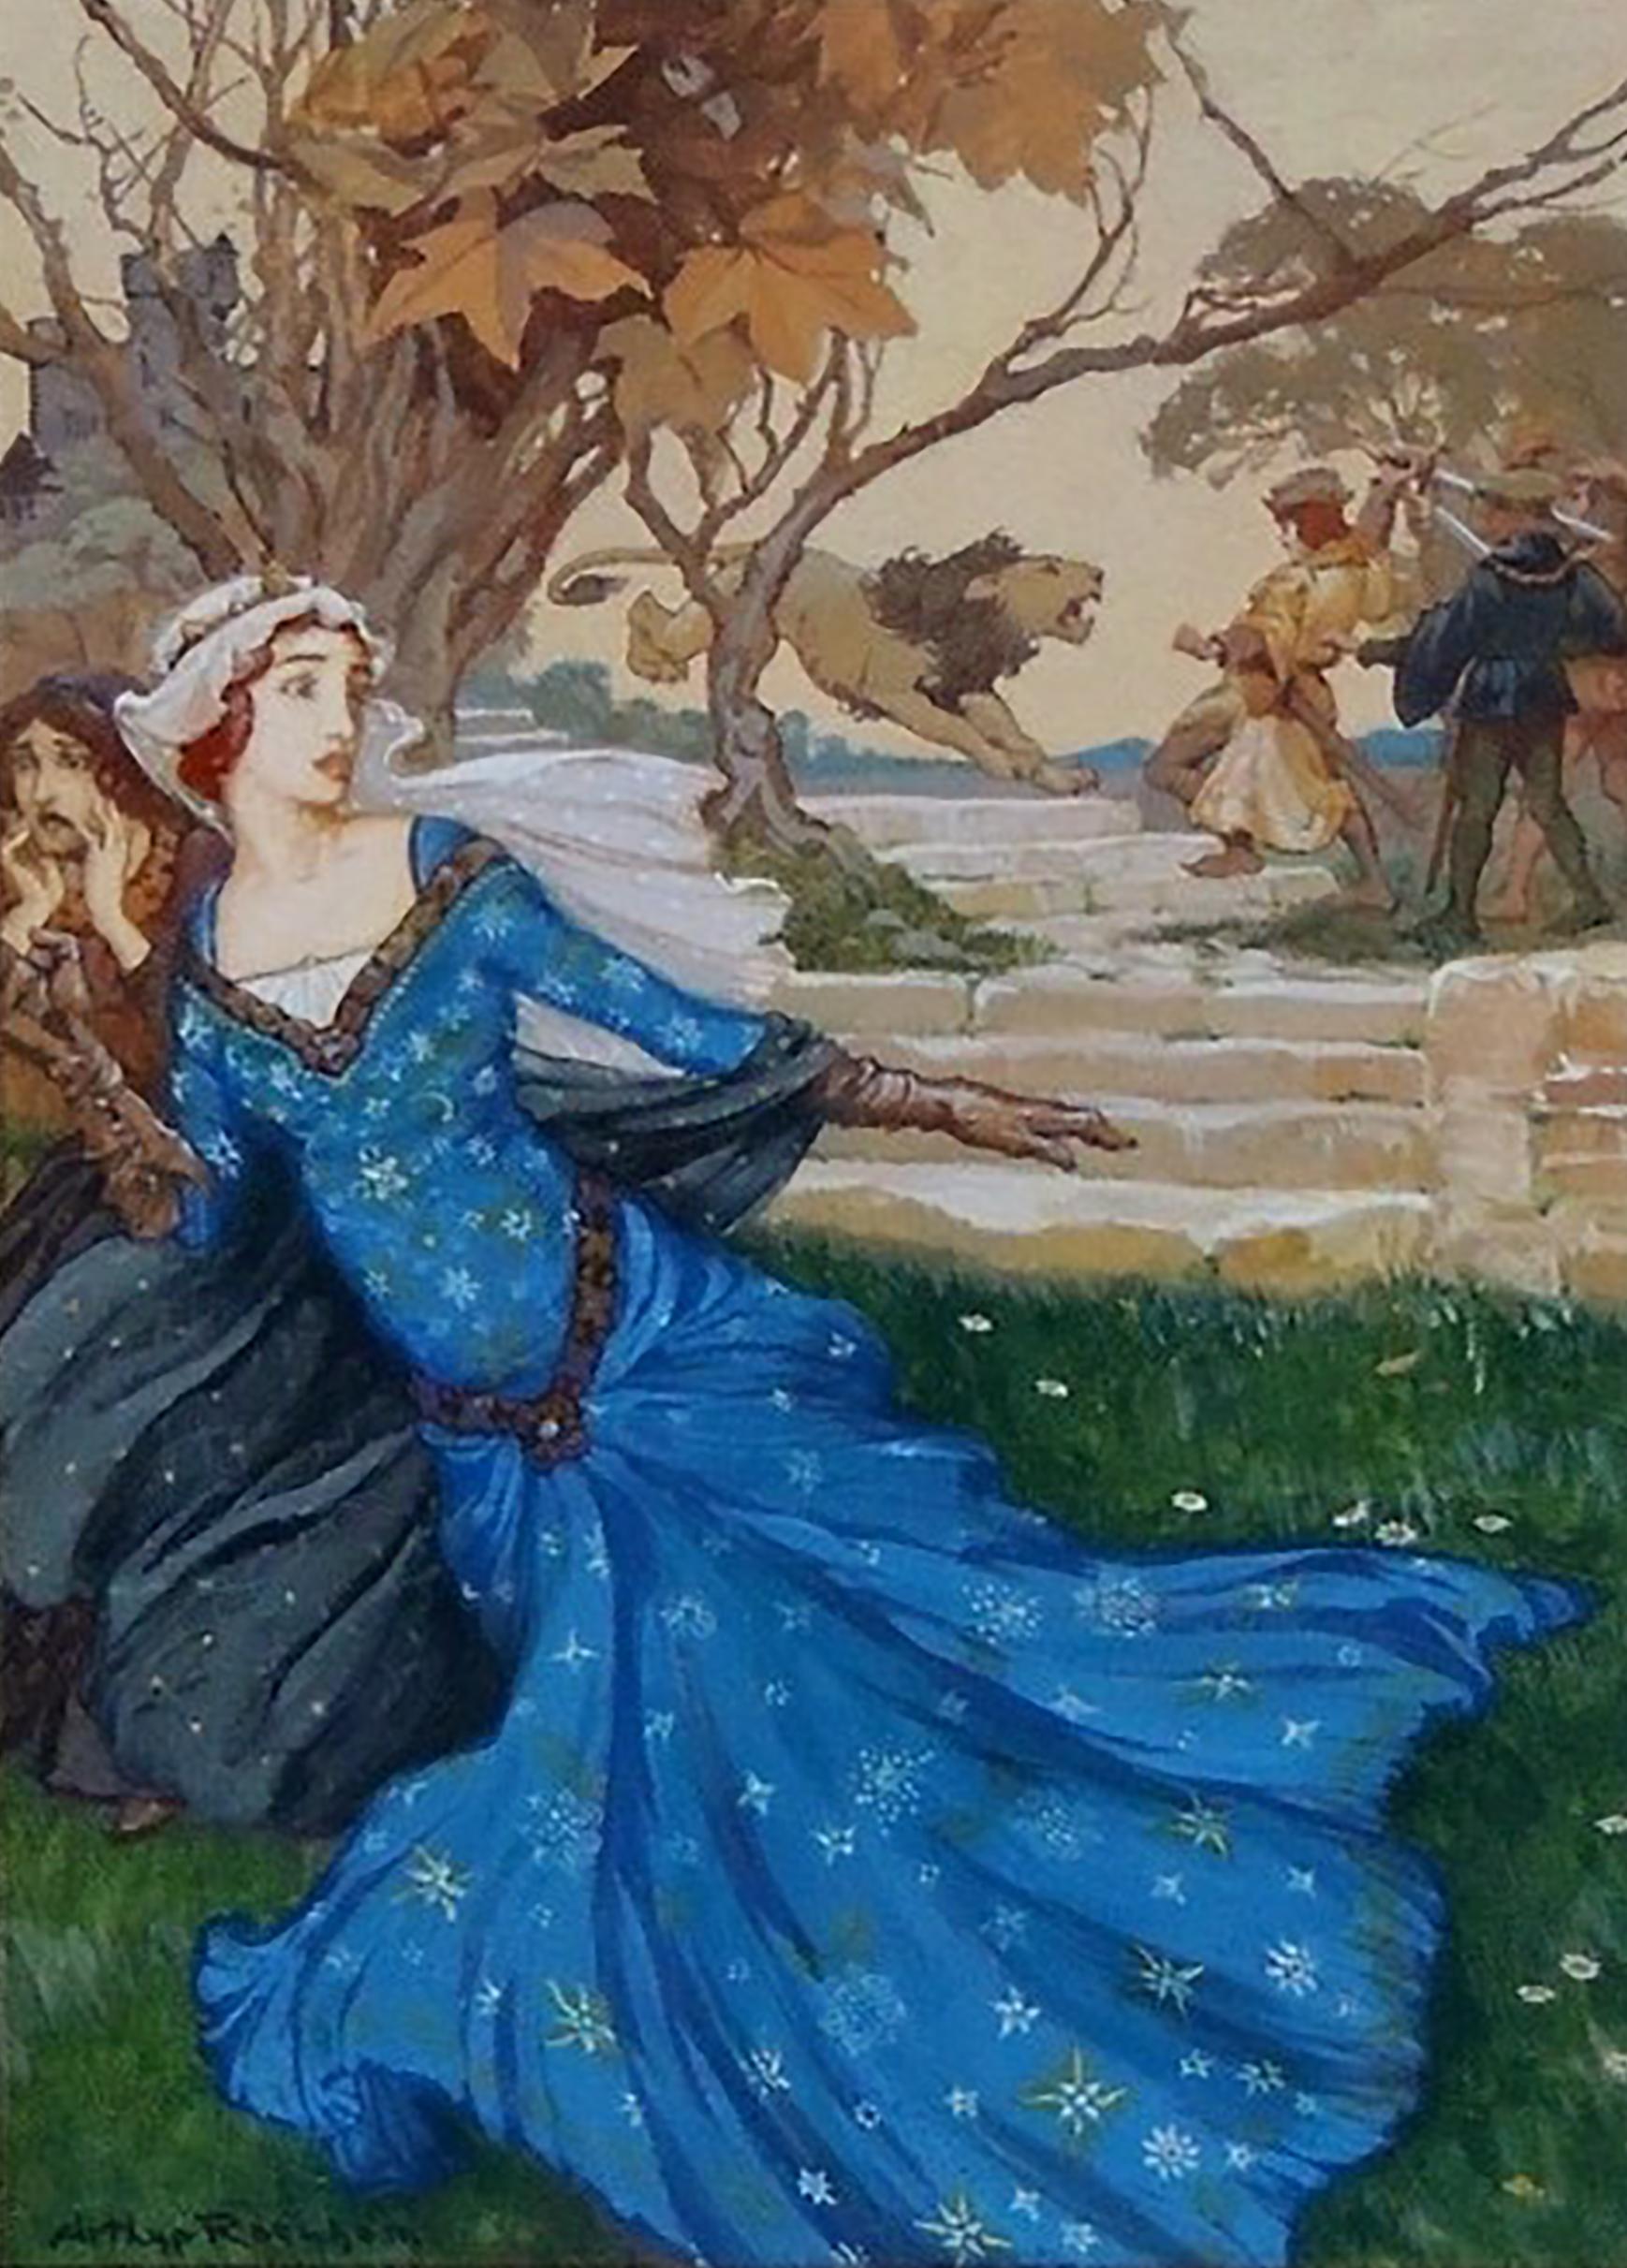 Guinevere Rescued by La Cote Male Taile - Painting by Arthur Rackham